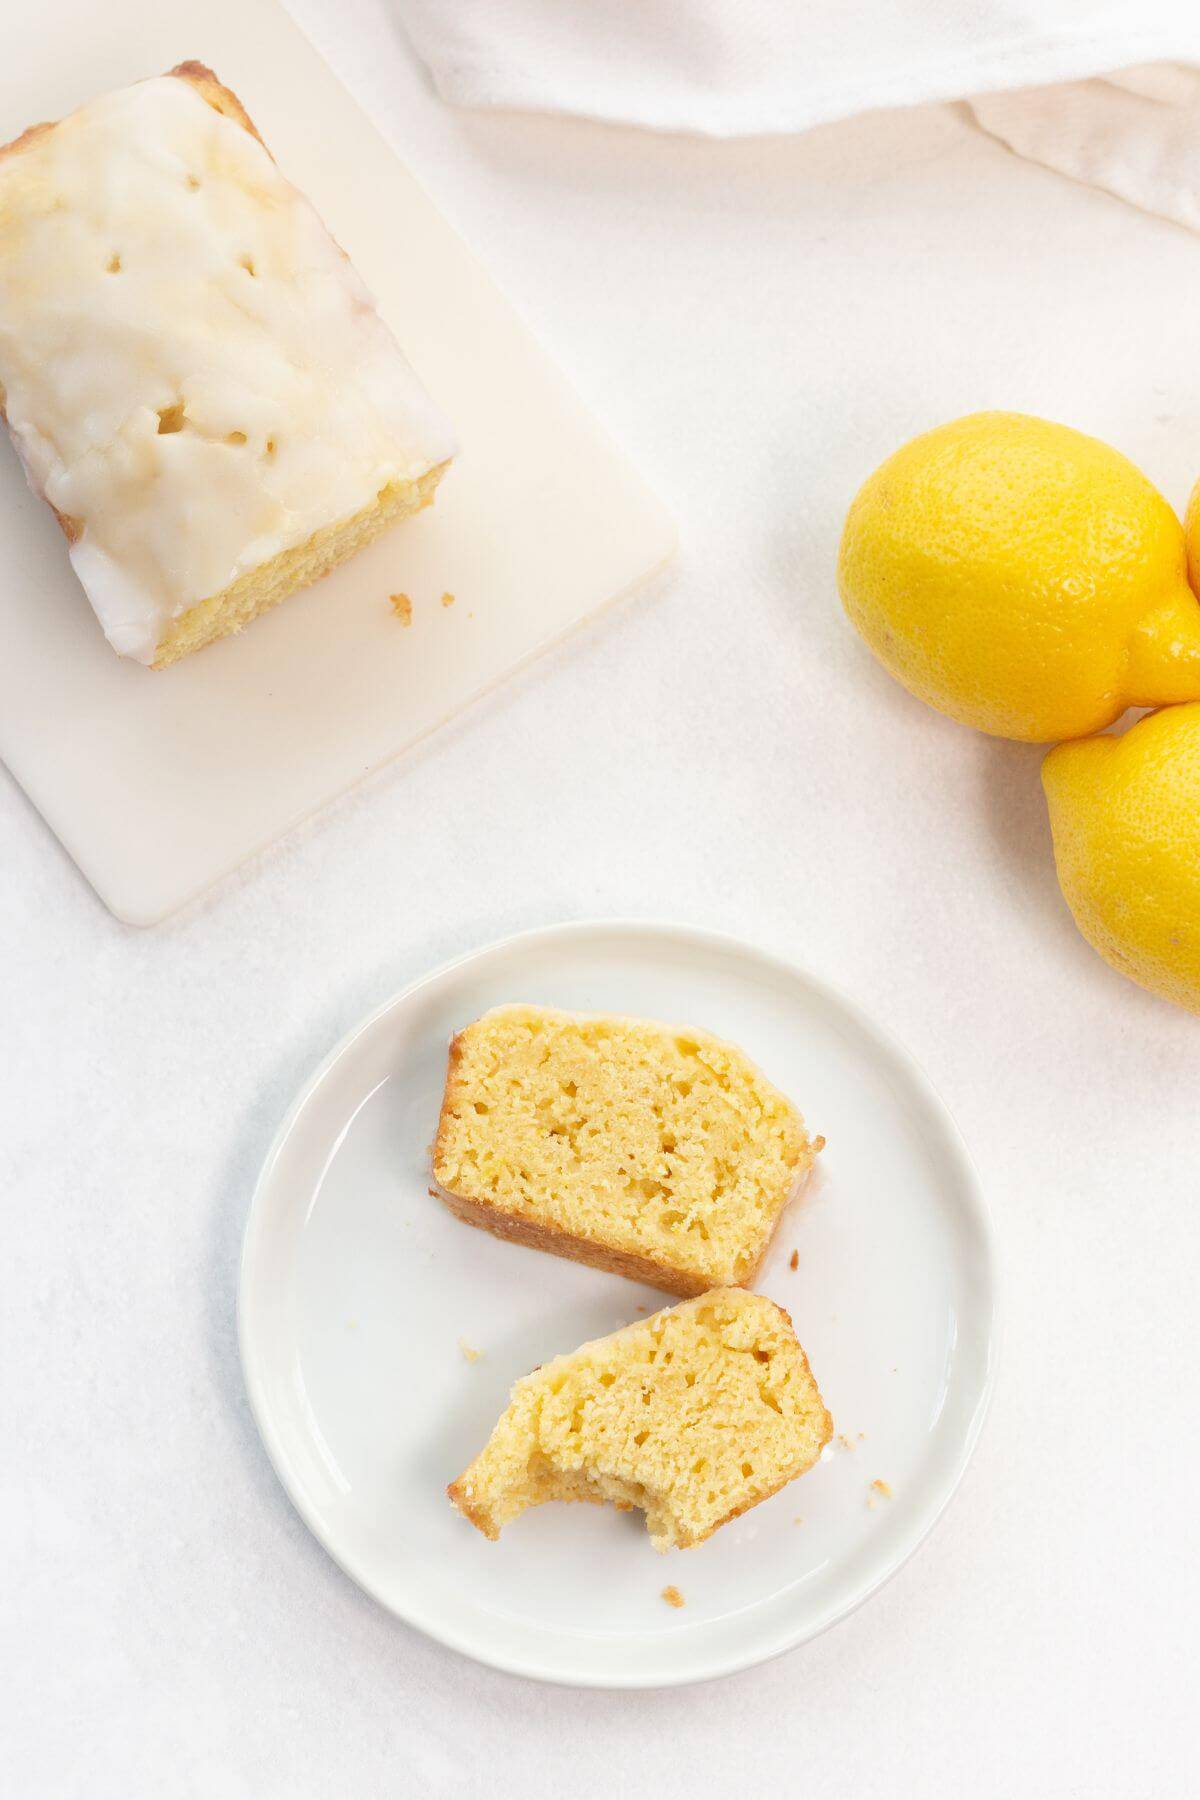 Sliced pieces of lemon loaf on plate with one bitten.